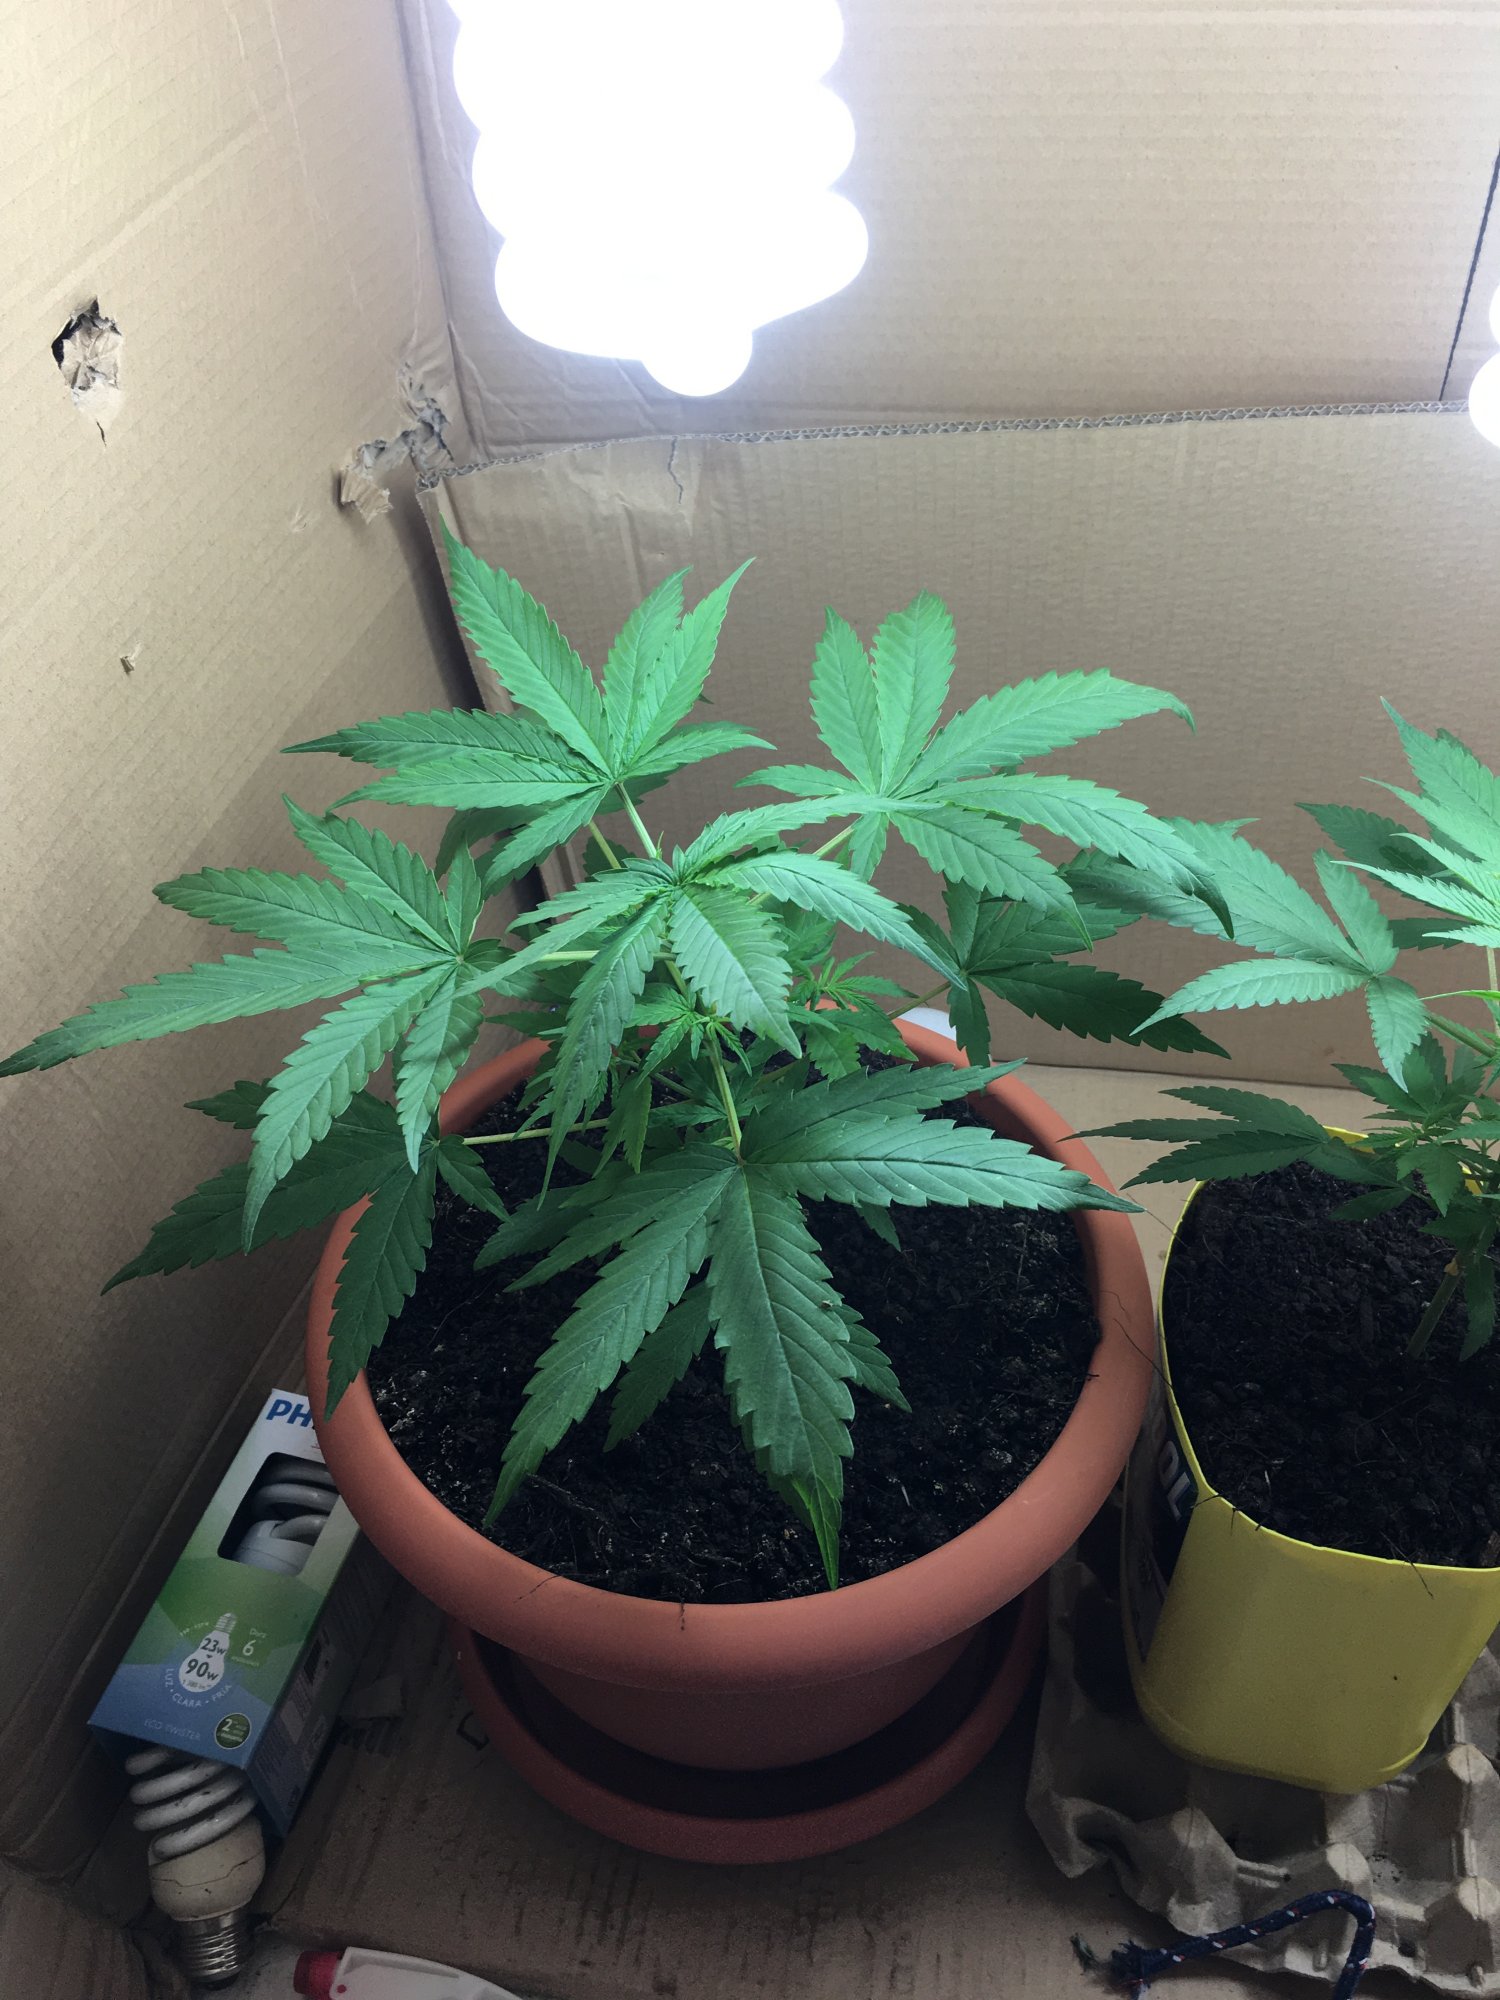 Help please first time grow bag seeds so just experimenting